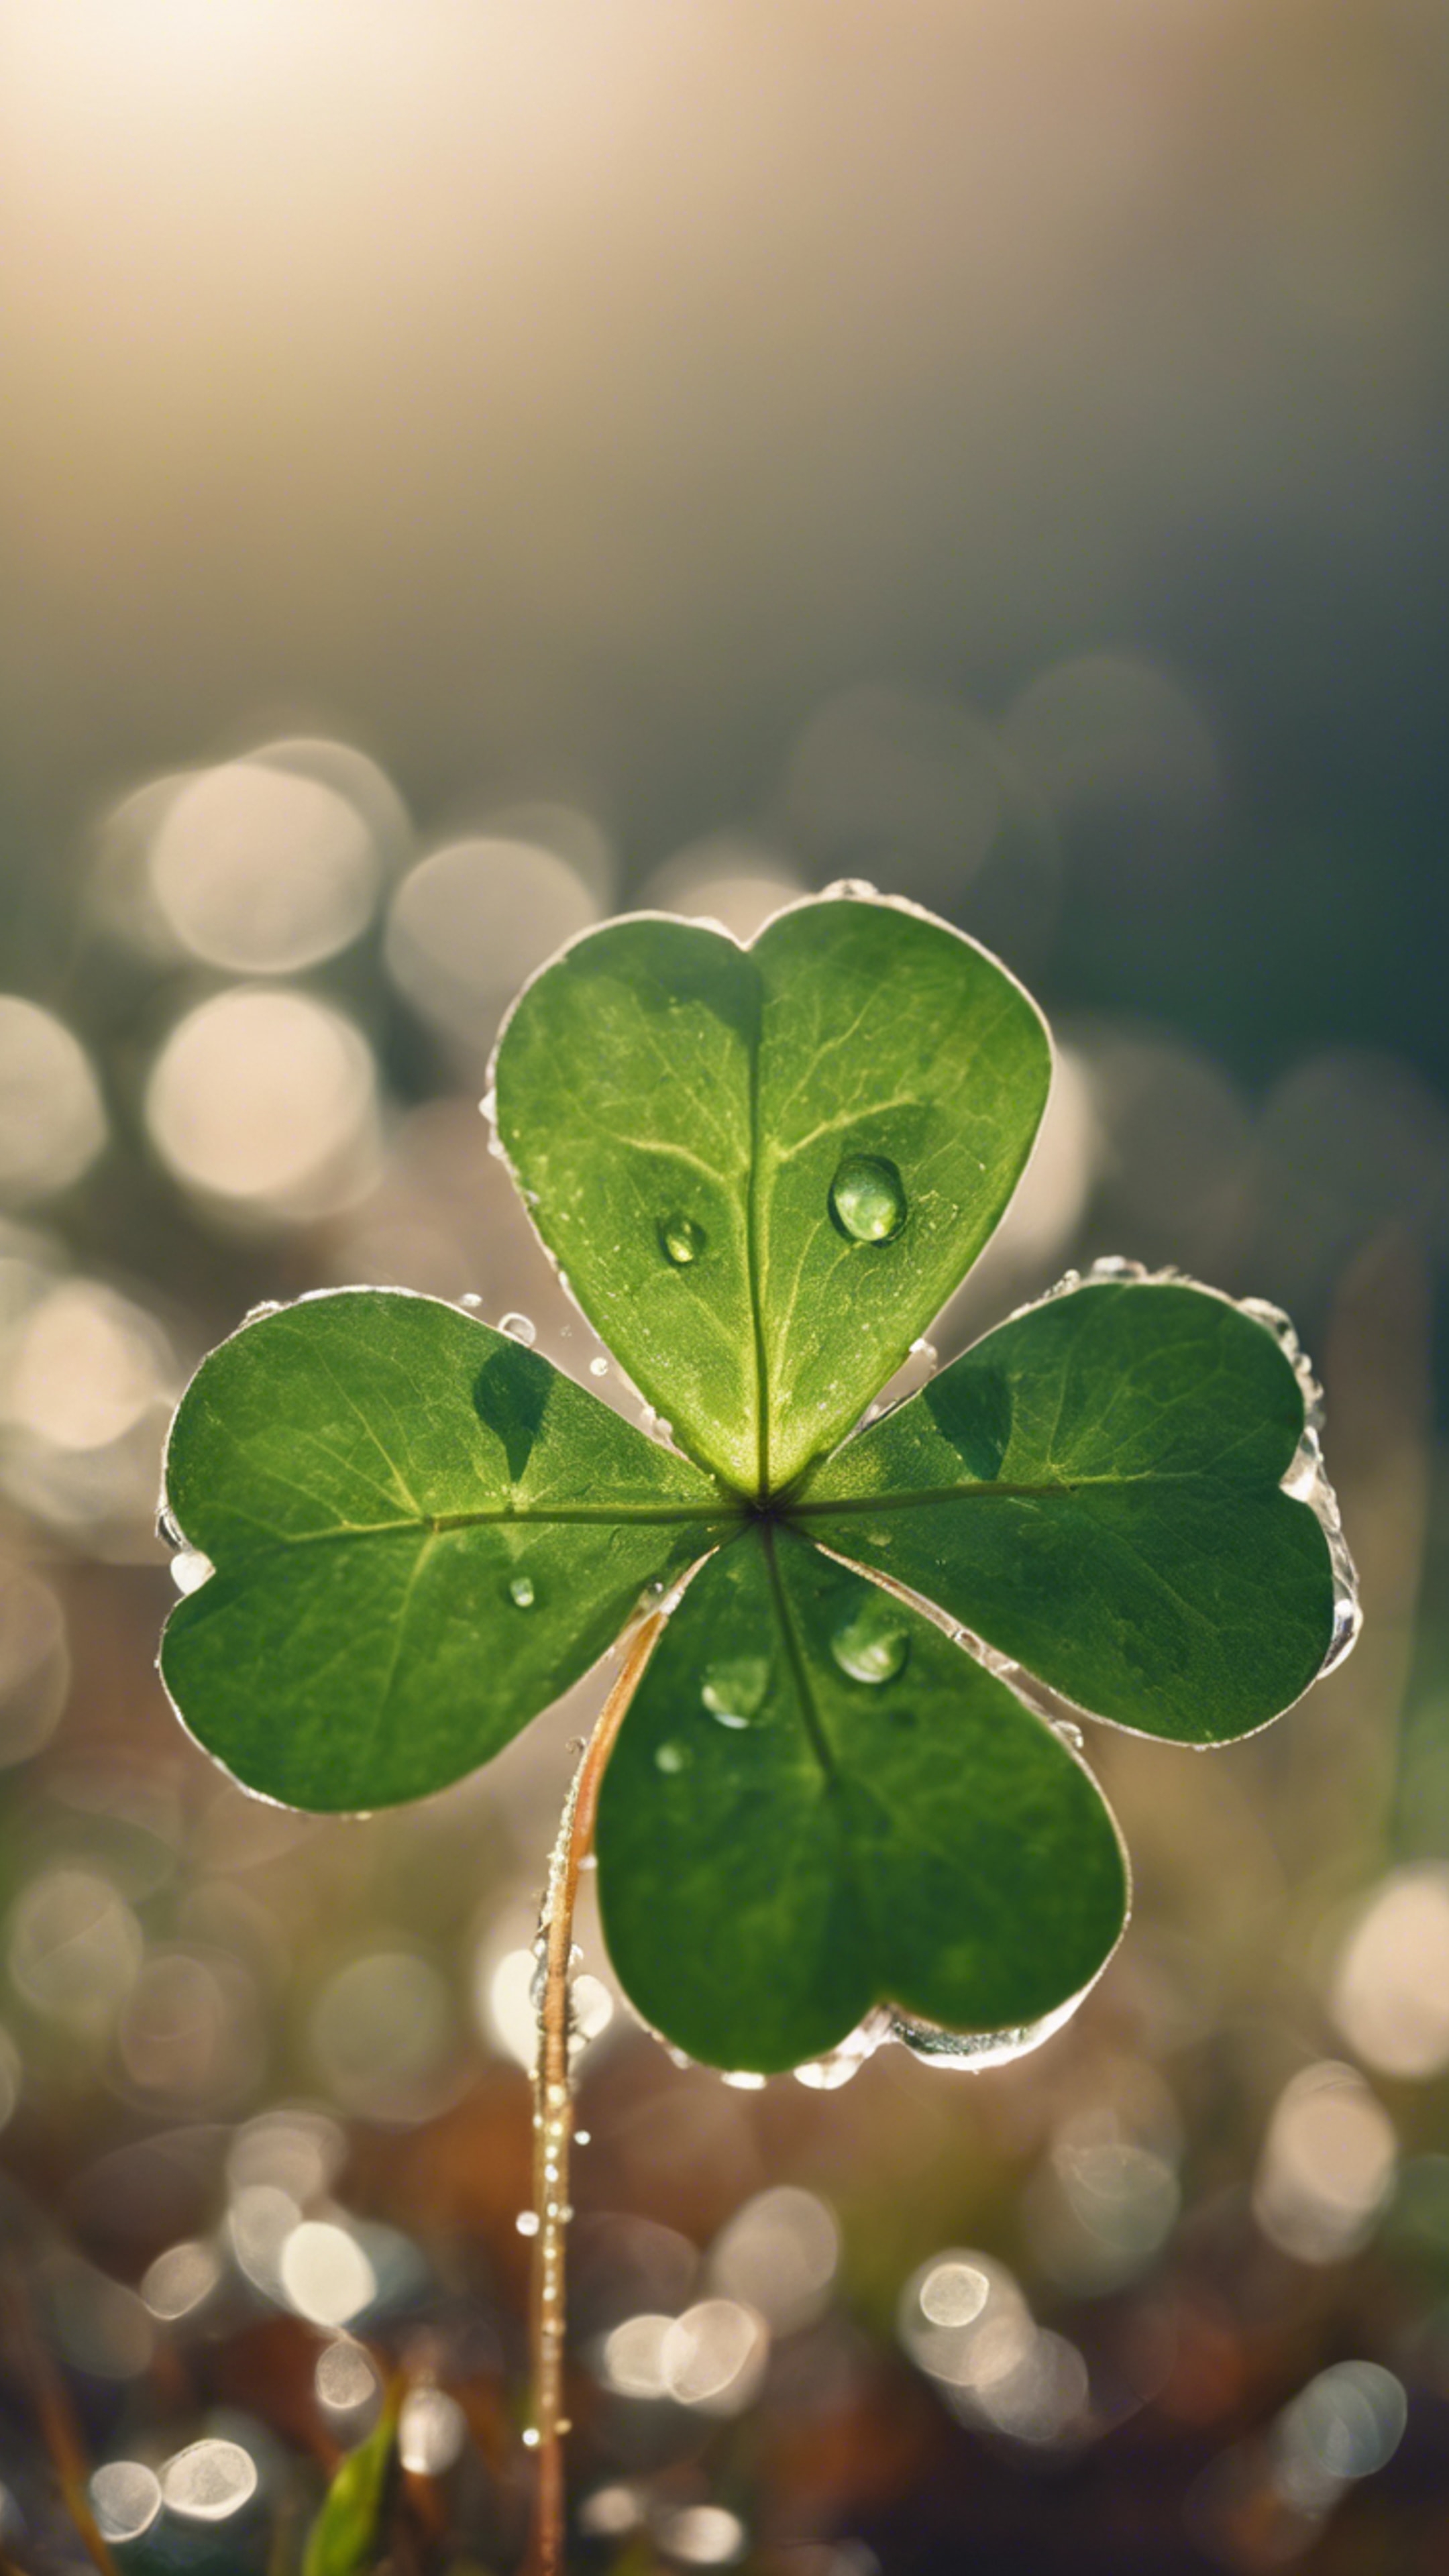 A close-up view of a four leaf clover gleaming in the morning dew. Behang[b8d84a1222284df192e8]